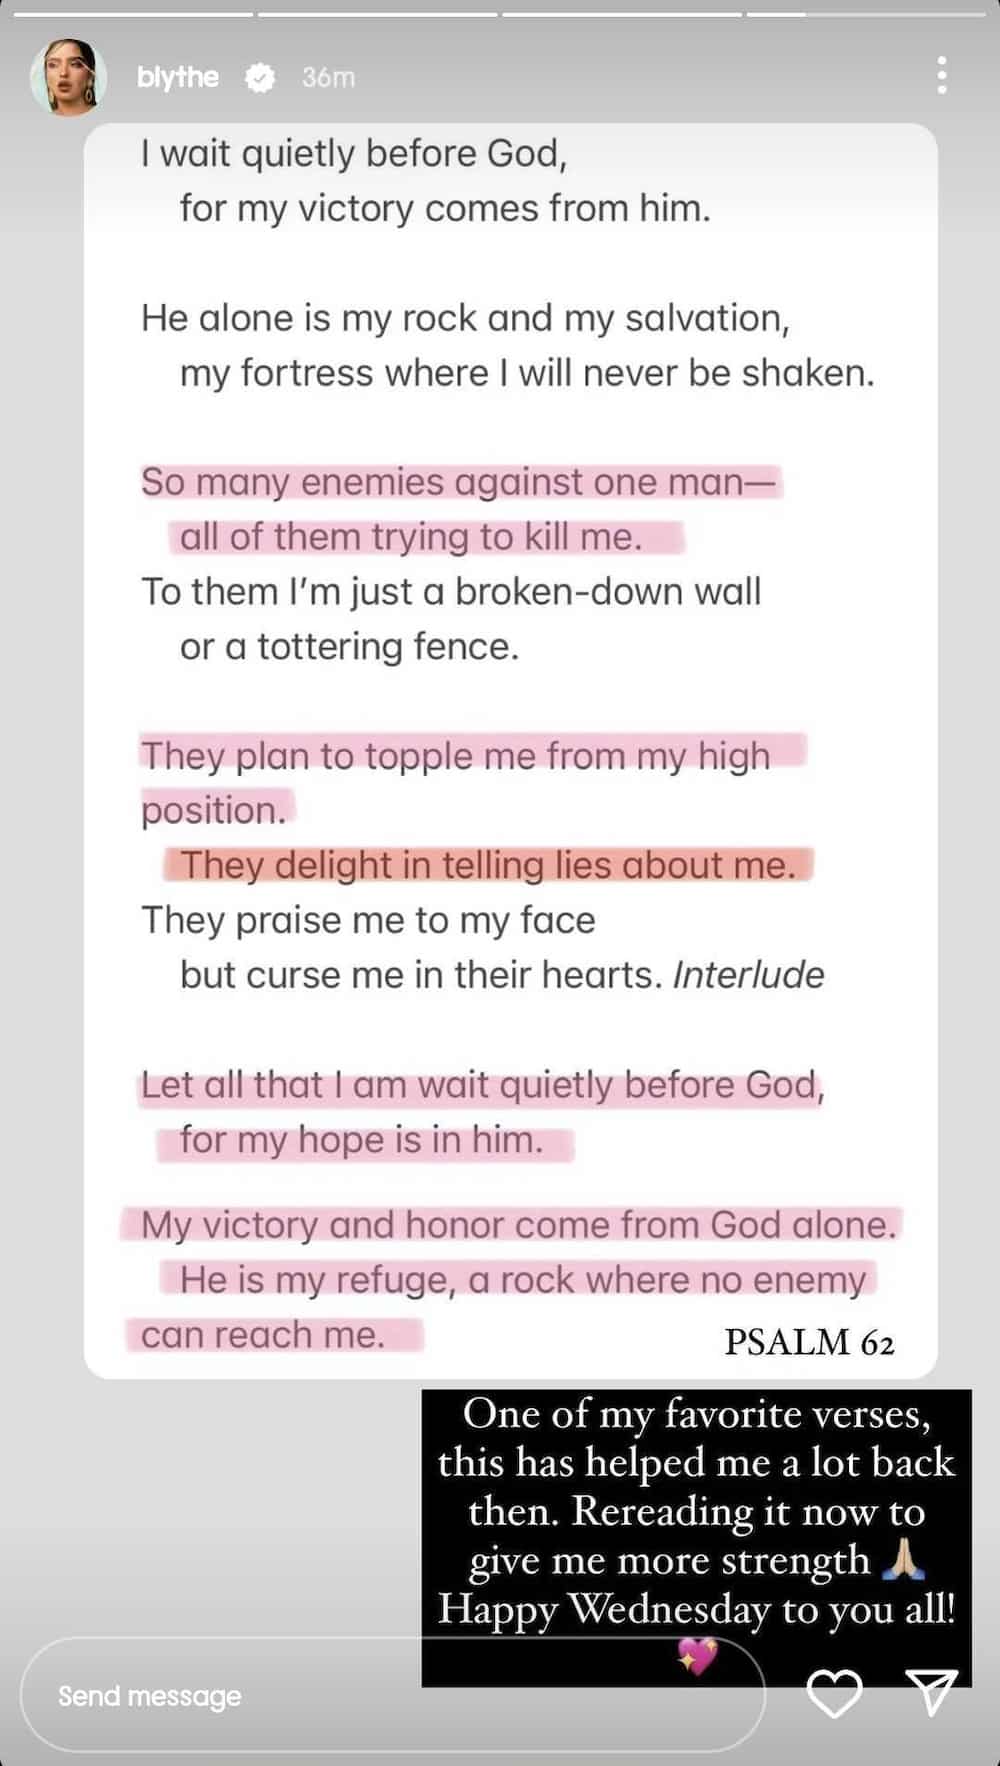 Andrea Brillantes posts a Bible verse: "So many enemies against one man"